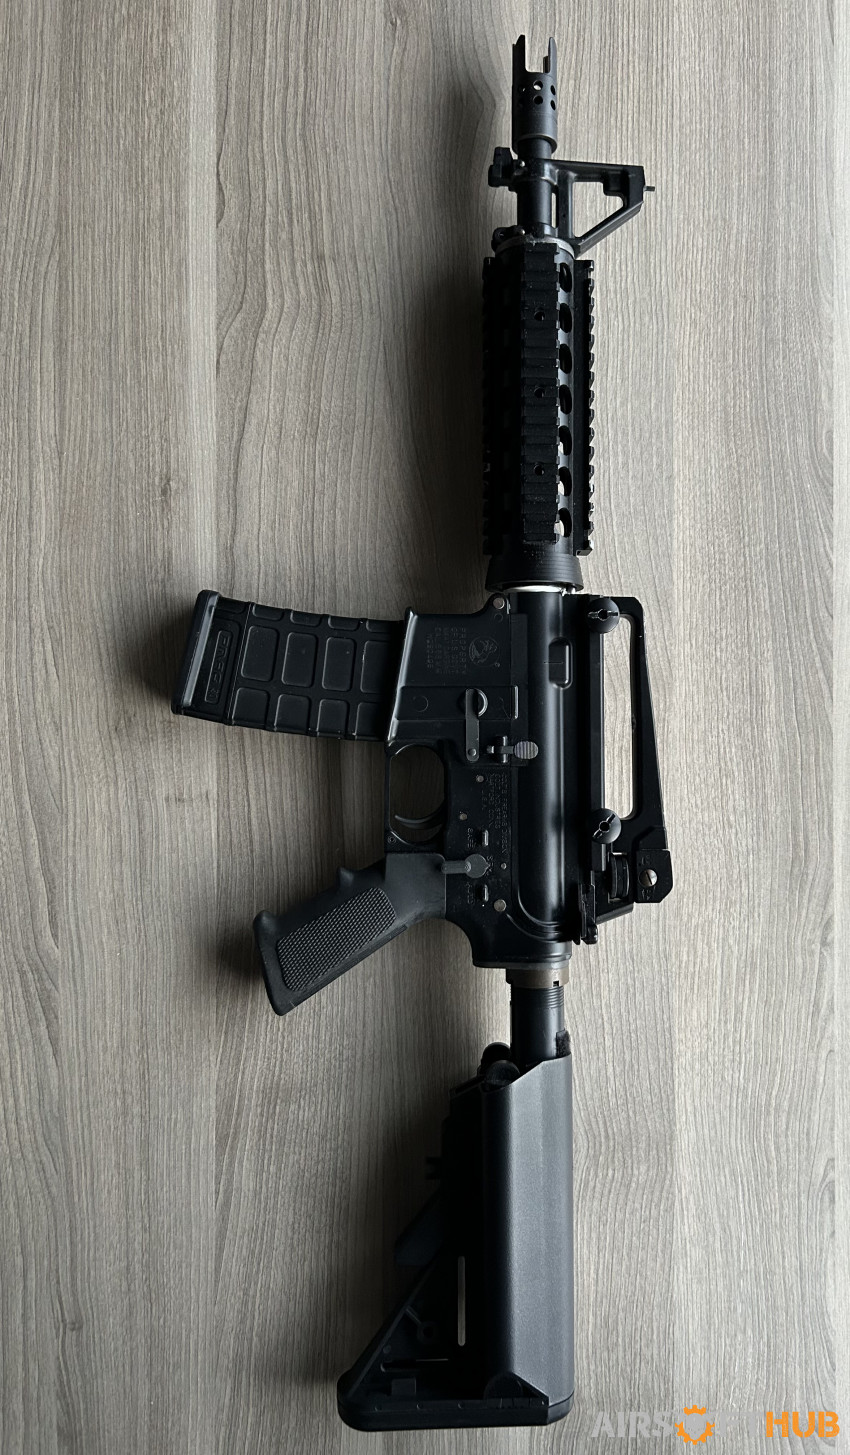 Western Arms M4 - Used airsoft equipment